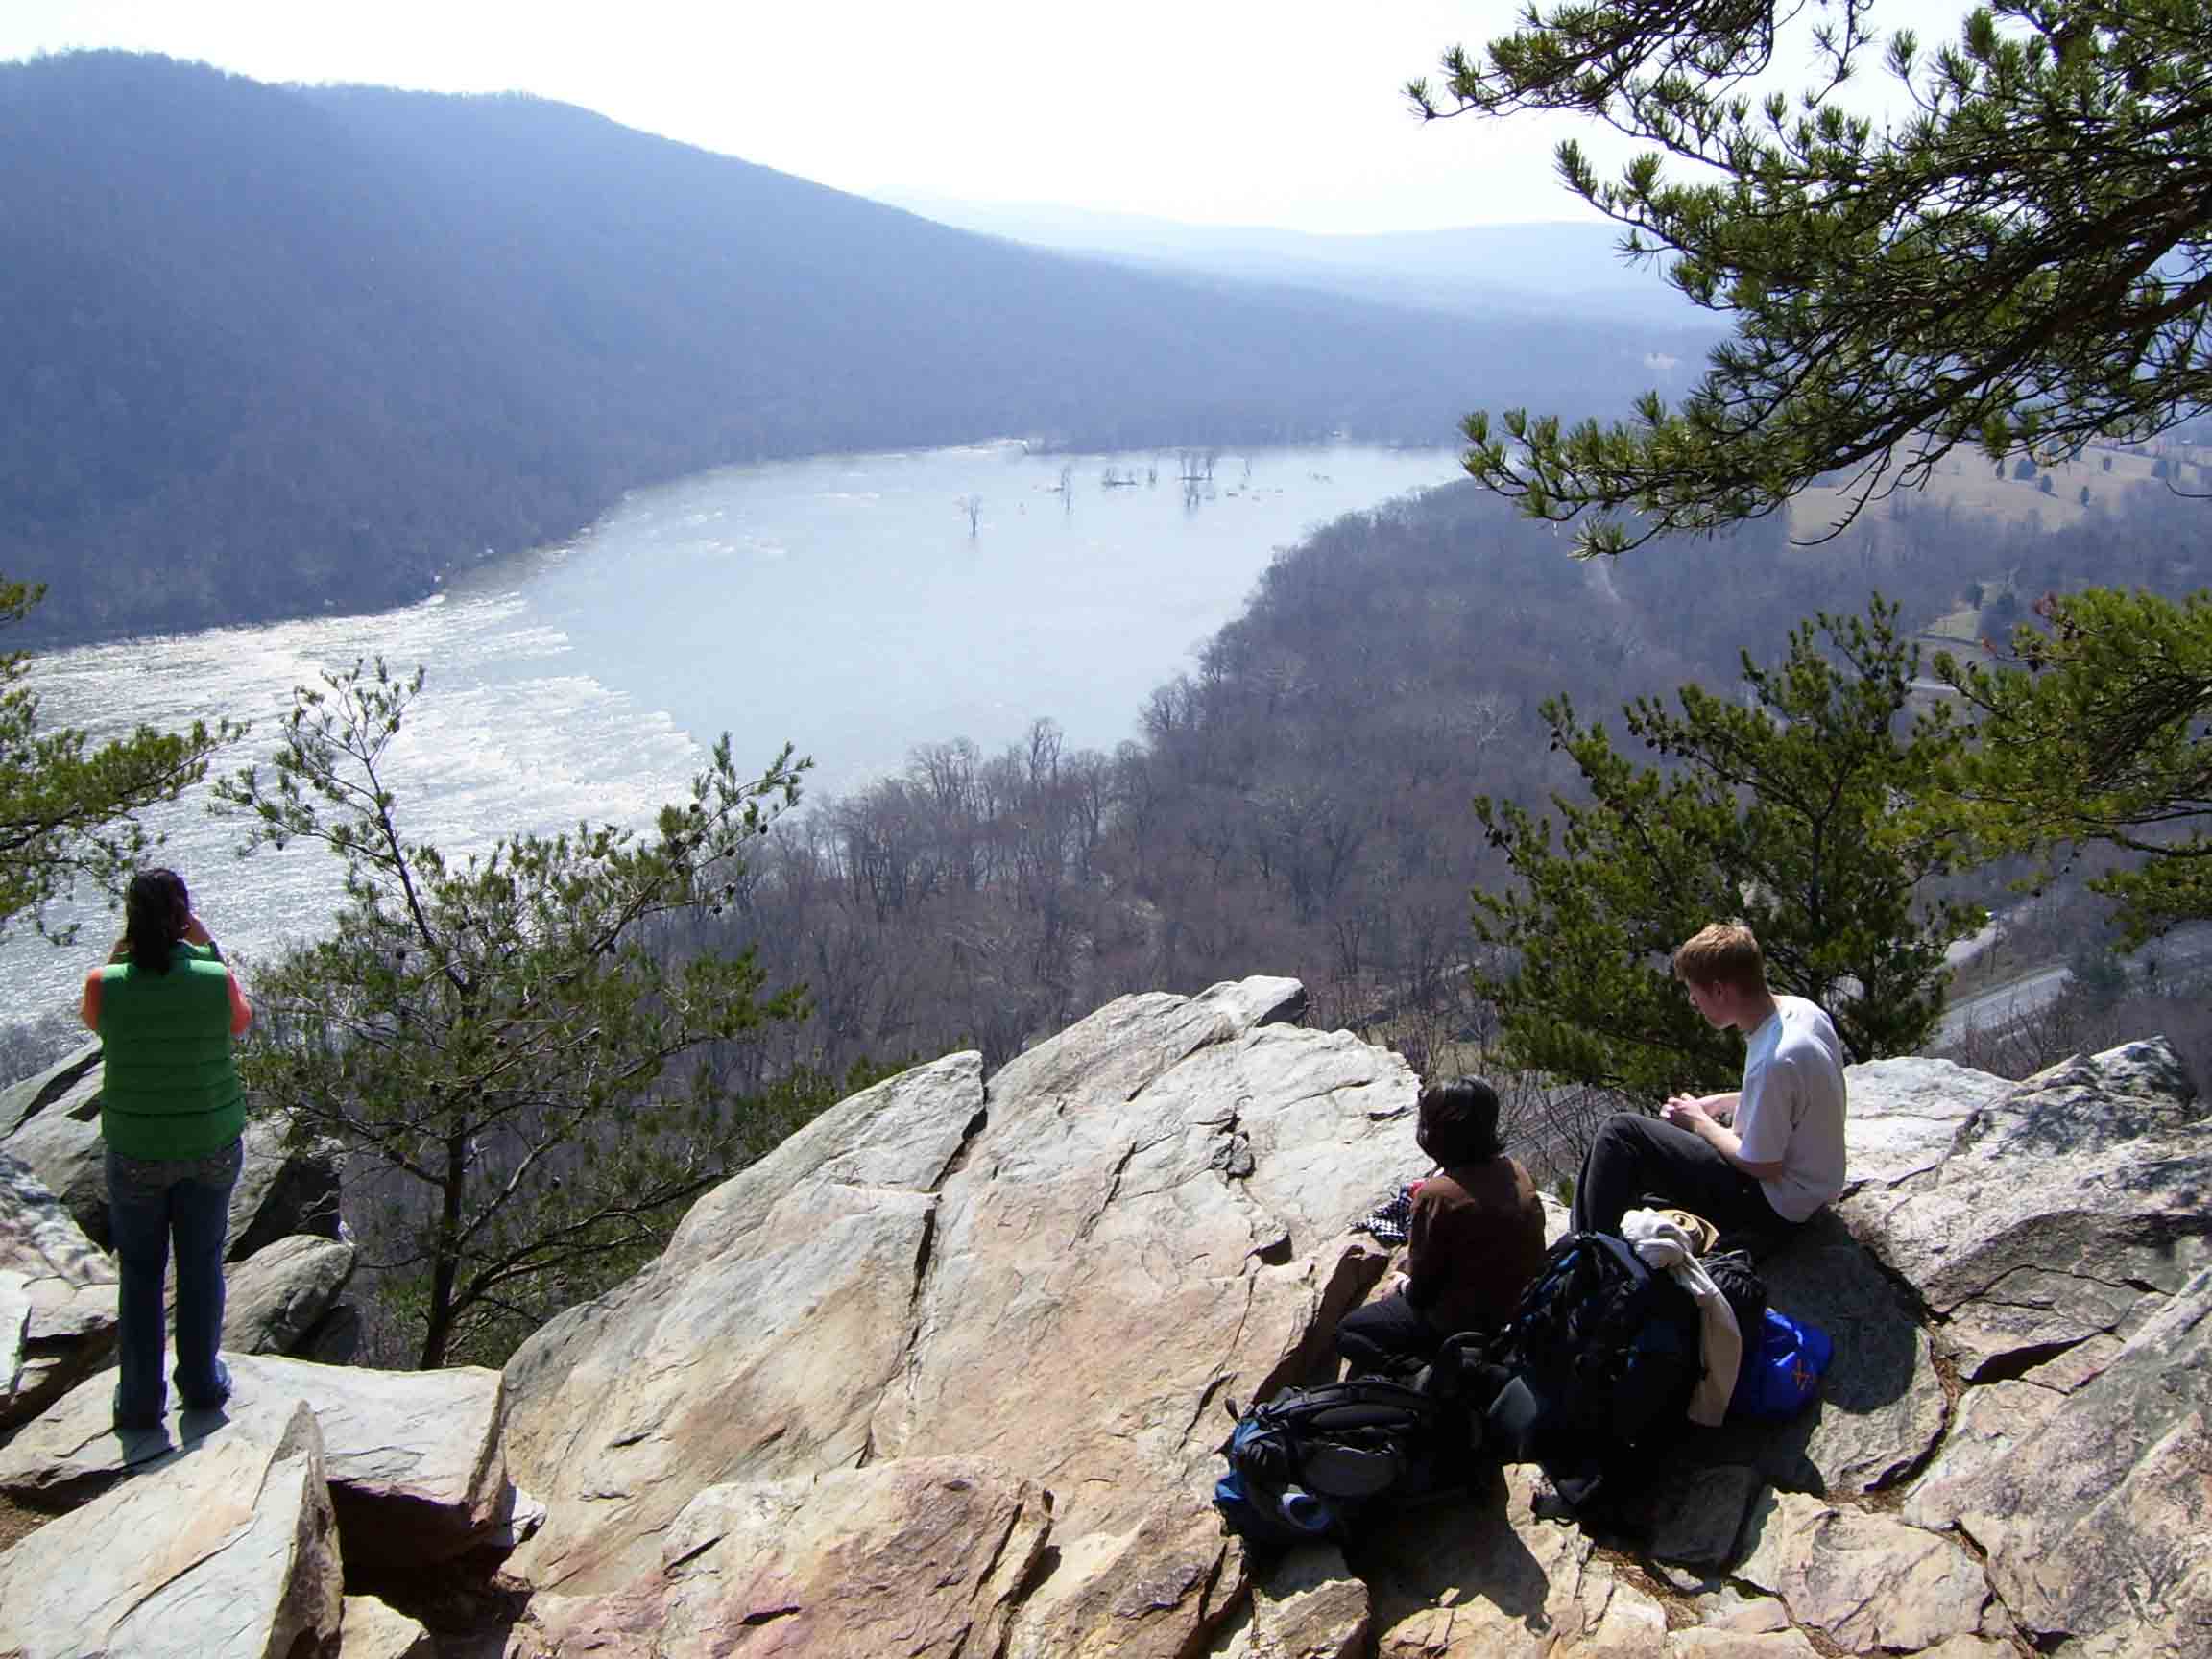 mm 5.8 - View to the west towards Harpers Ferry. The river is the Potomac. The day was very mild for March, but unfortunately hazy.   Courtesy dlcul@conncoll.edu